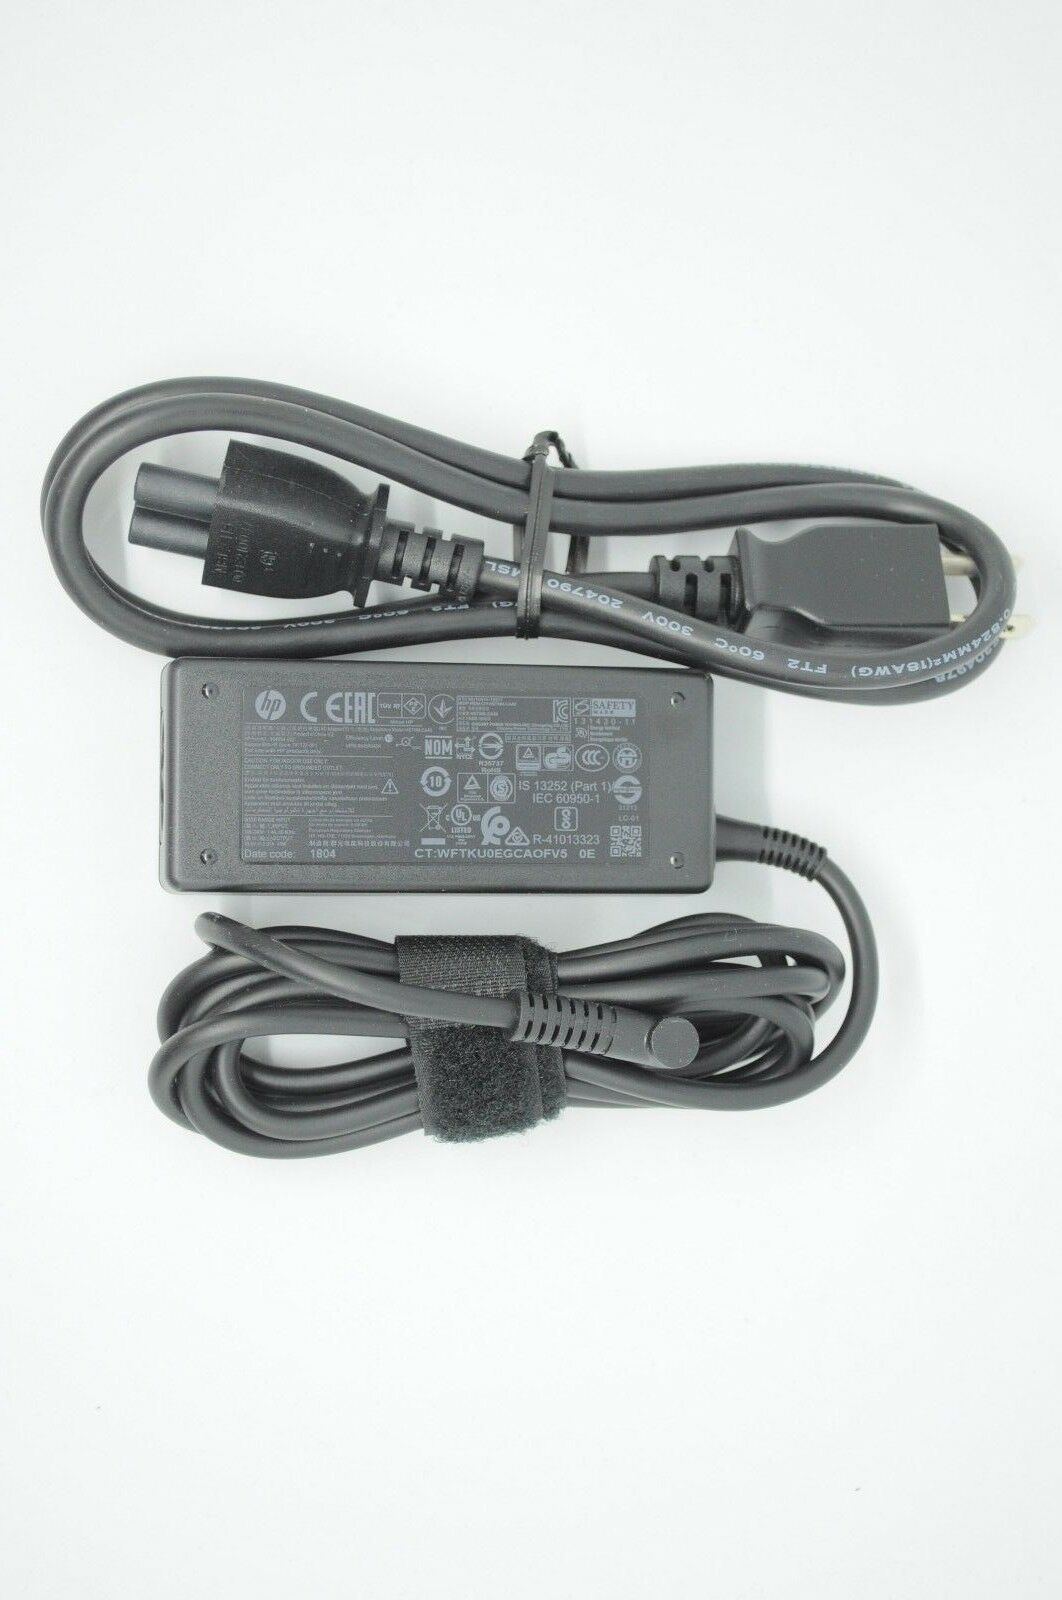 New Genuine OEM Power Charger Adapter for HP LAPTOP 15-AY111CY, 15-AY112CY Color: Black Brand: